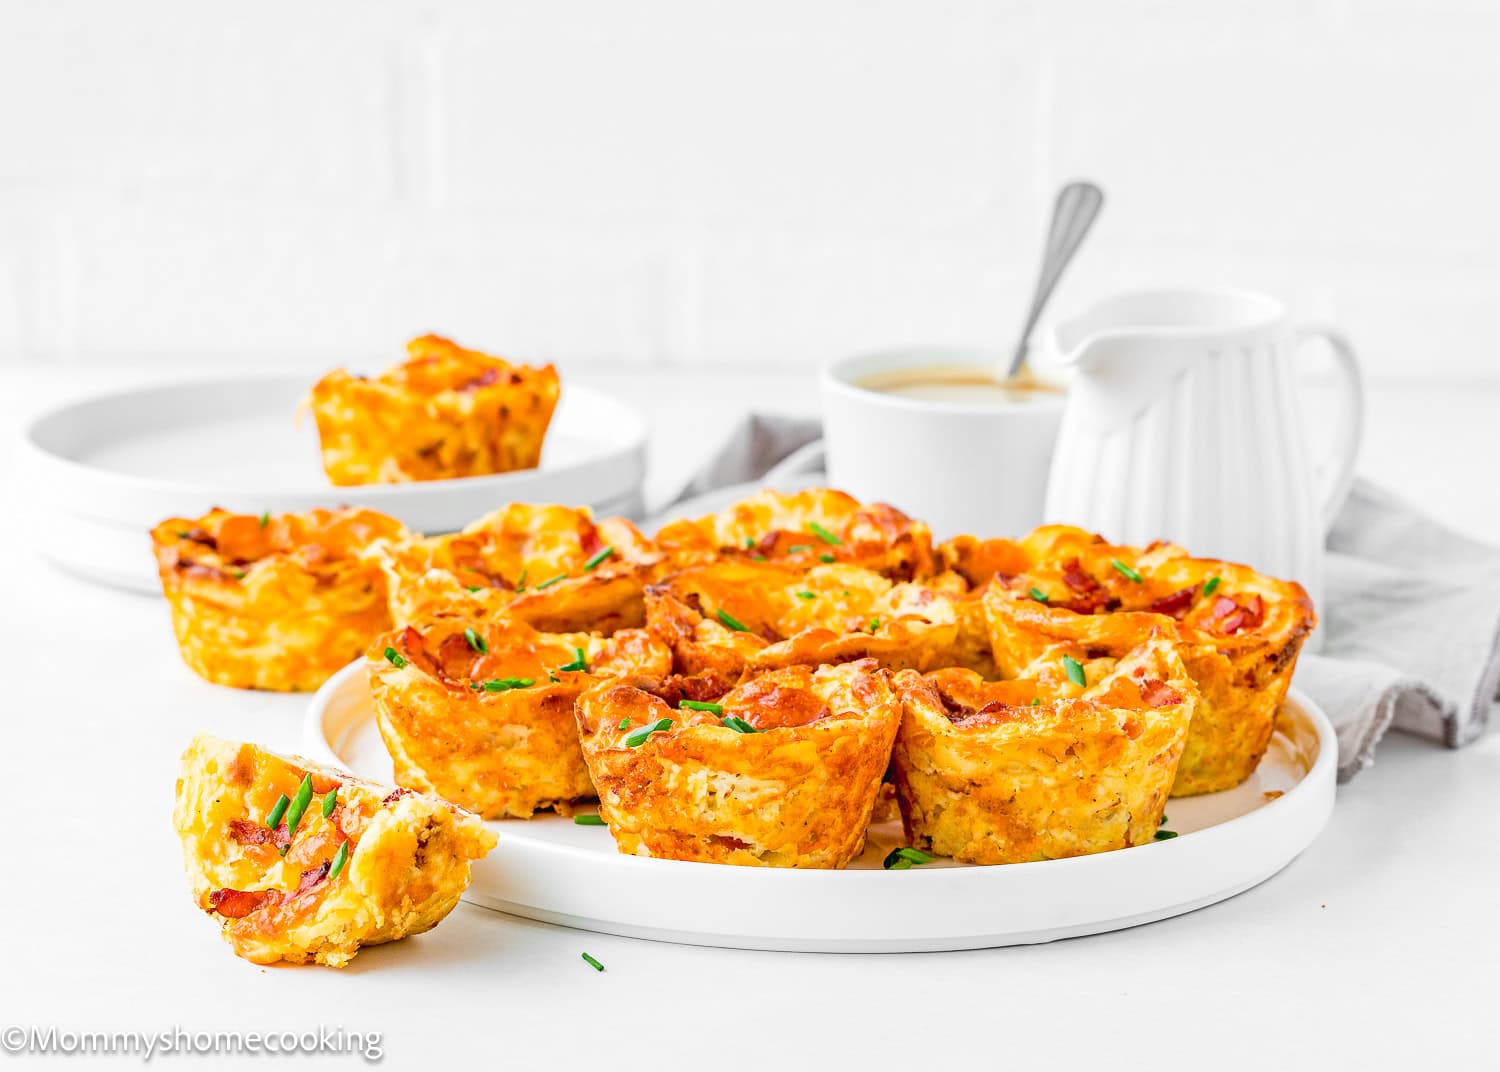 Breakfast Egg Muffins Without Eggs with chopped chives in a plate with a cup of coffee in the background.